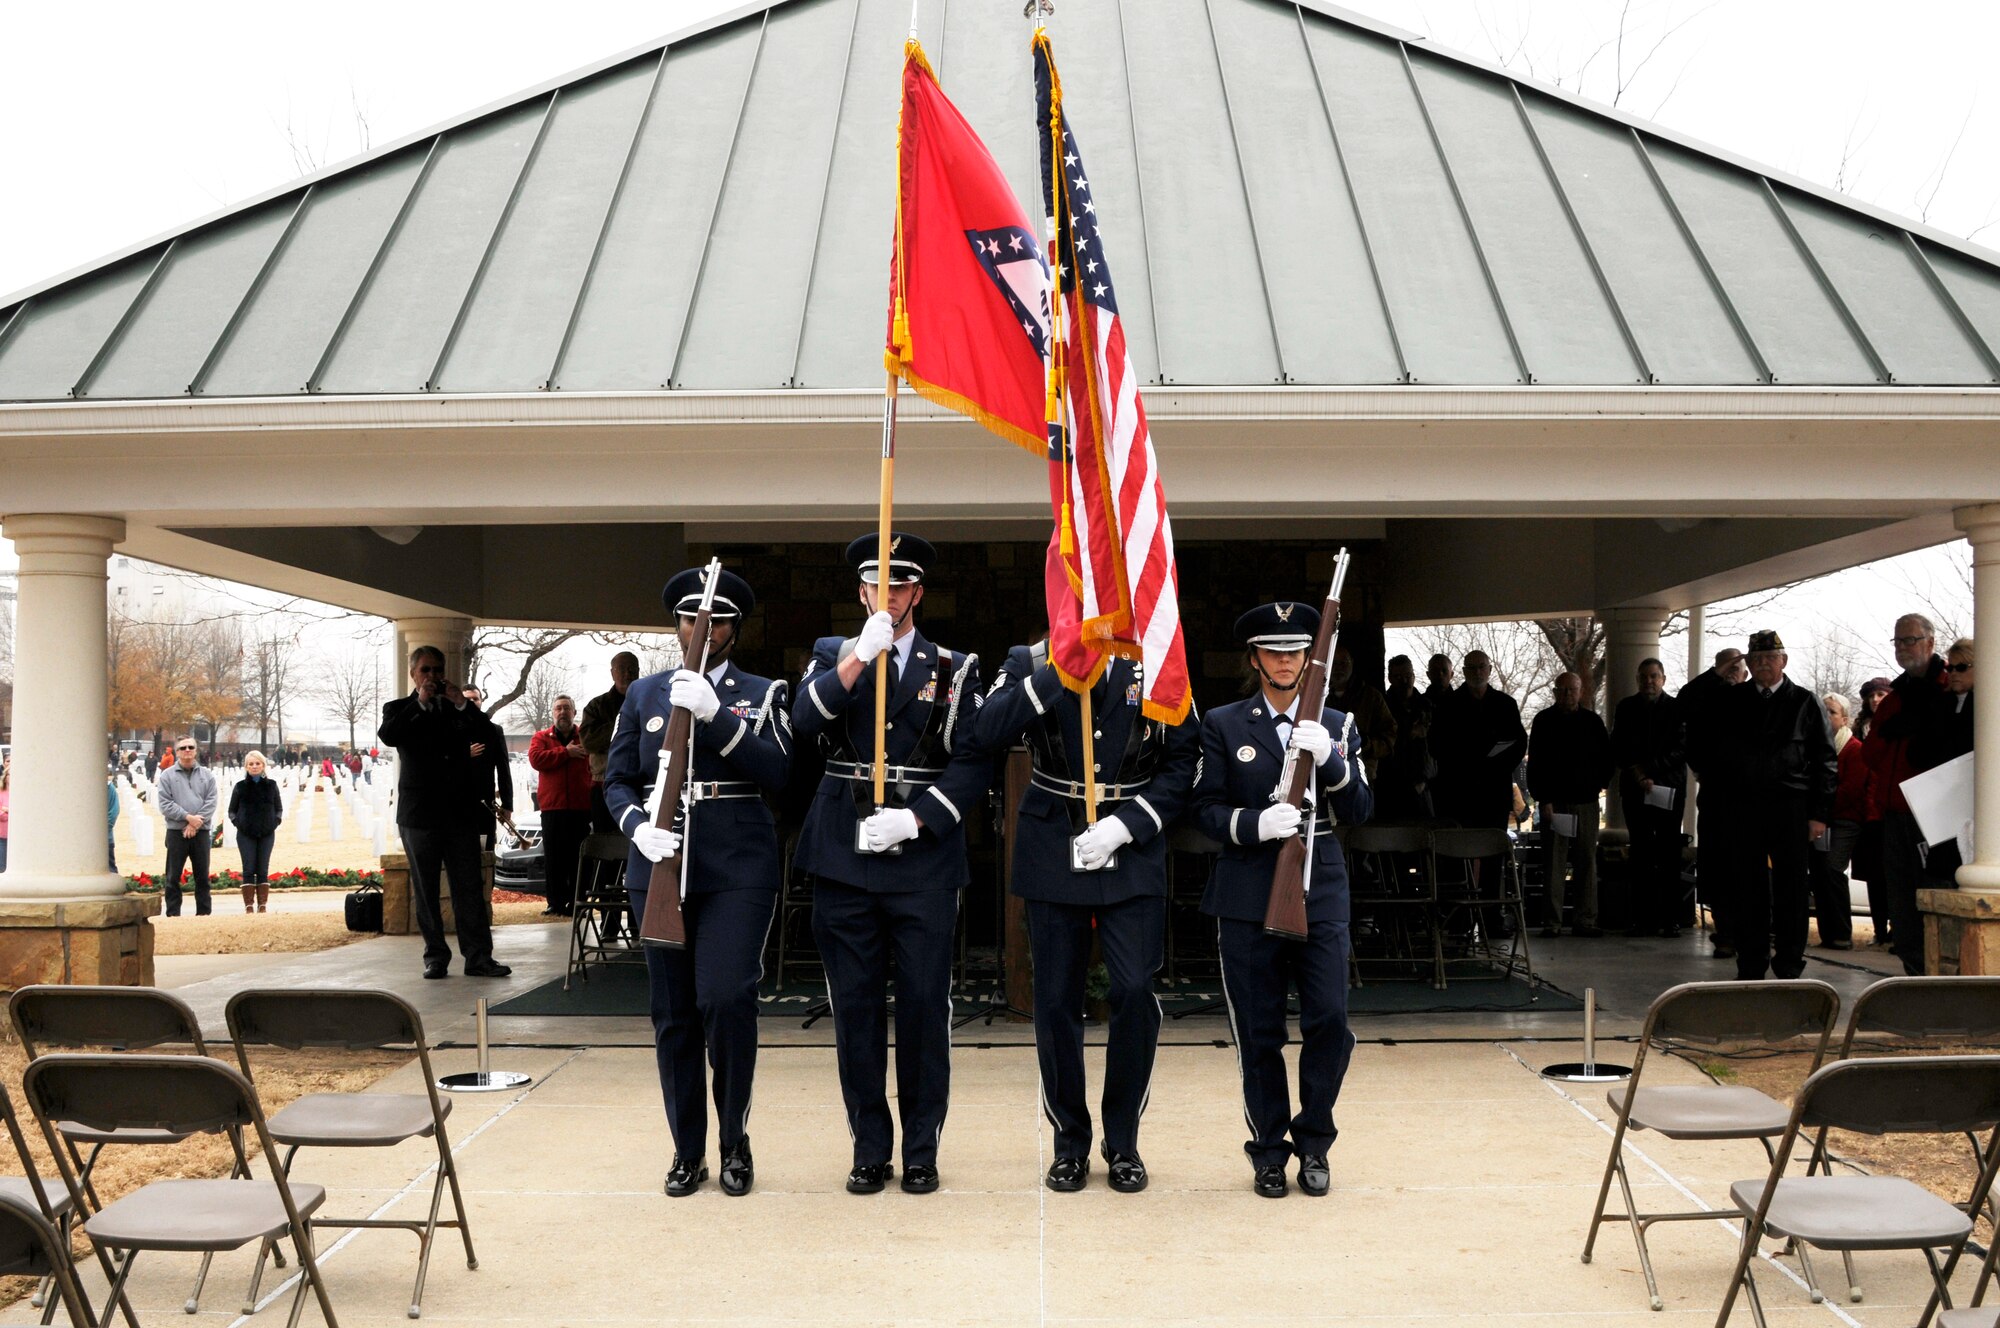 Airmen from the 188th Wing Honor Guard post the colors during the annual Christmas Honors wreath ceremony at the U.S. National Cemetery in Fort Smith, Ark., Dec. 13, 2014. In 2009, the Fort Smith Regional Chamber of Commerce held the first Christmas Honors inspired by the Wreaths Across America program. Wreaths Across America was founded by Morrill Worcester to remember the fallen, honor those who served and teach children the value of freedom. (U.S. Air National Guard photo by Staff Sgt. Hannah Dickerson/released)